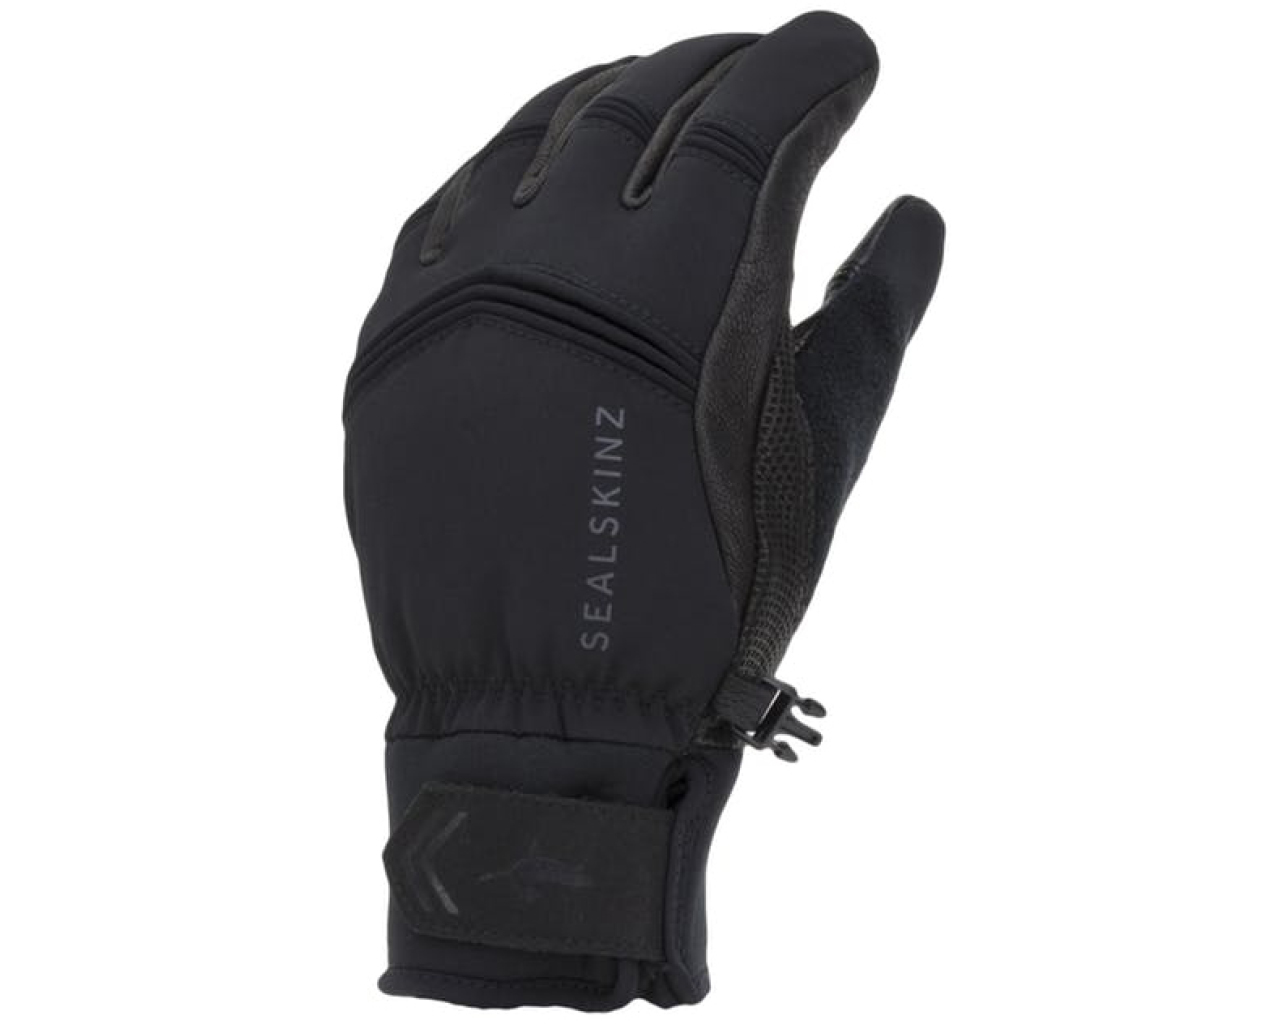 Sealskinz Witton Waterproof Extreme Cold Weather Cycling Gloves ...